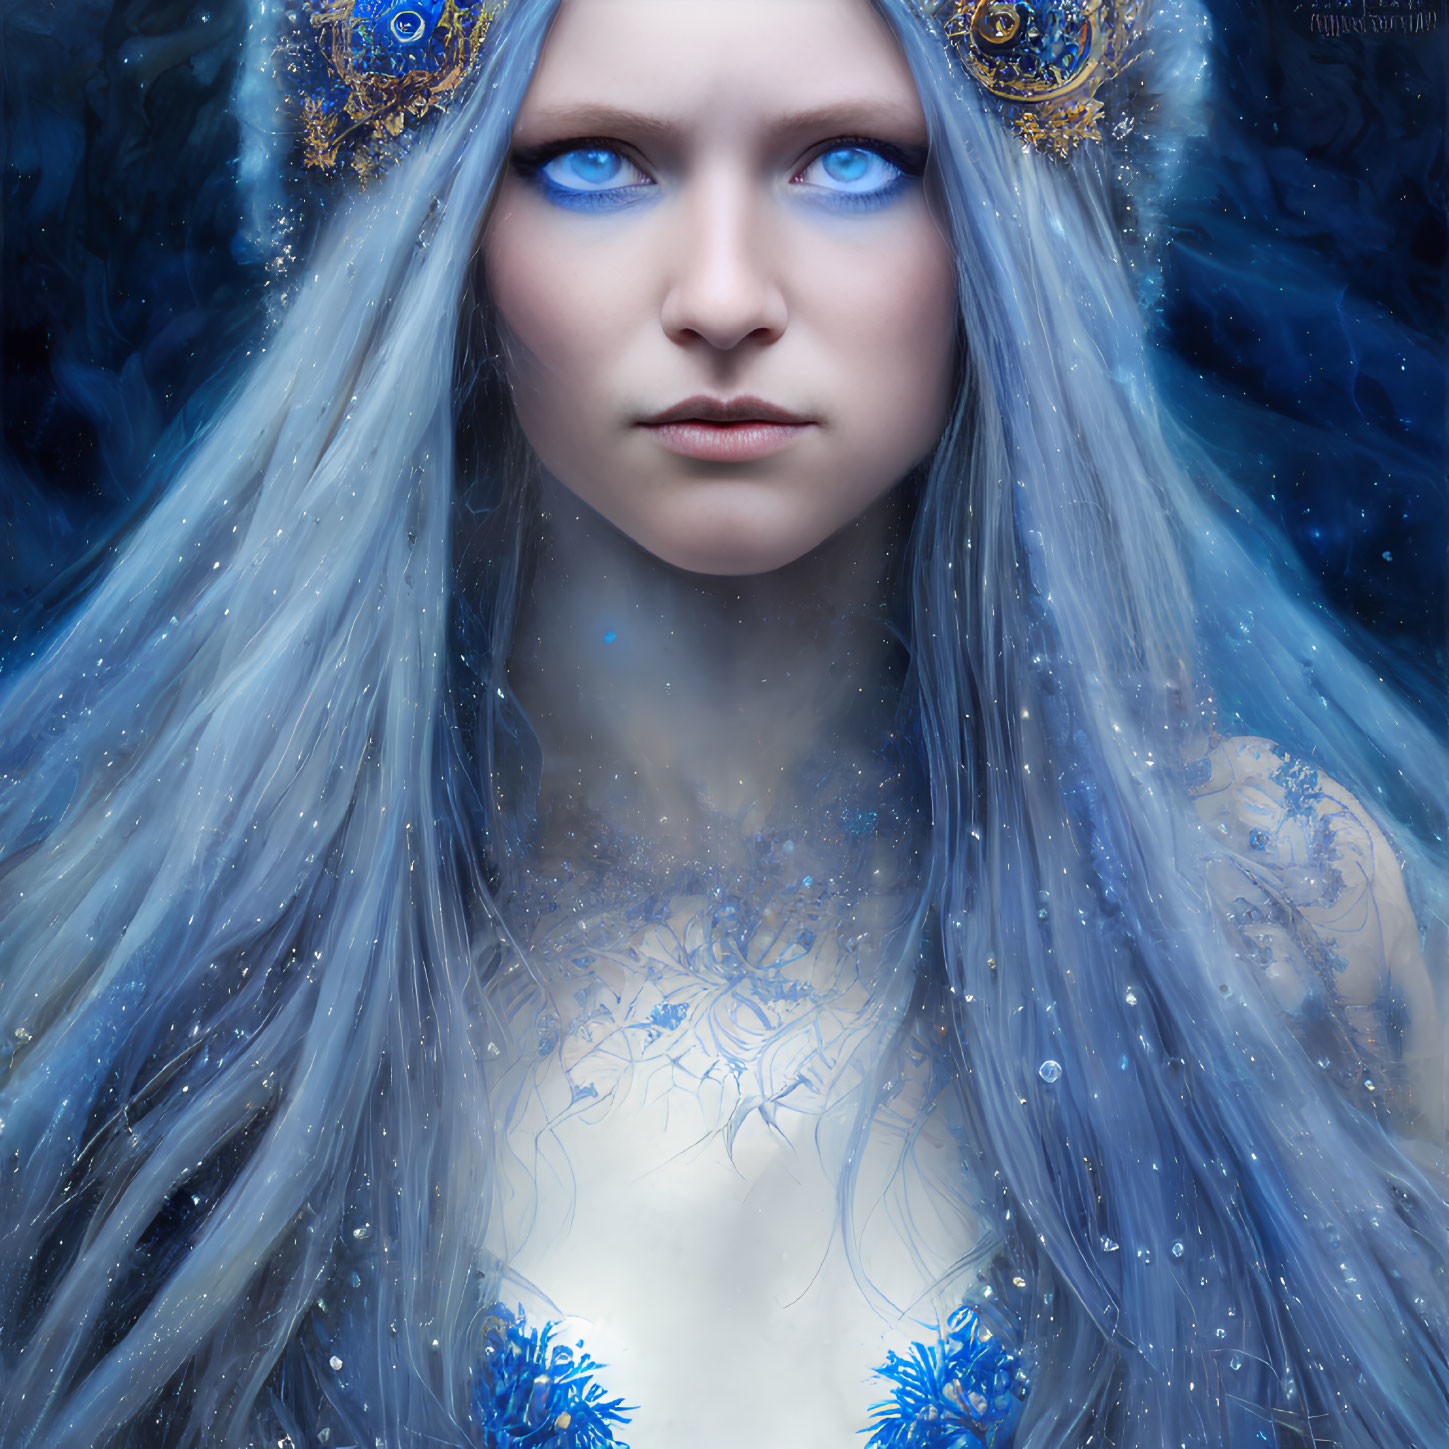 Fantasy-inspired image of person with blue eyes, pale blue hair, and floral skin patterns